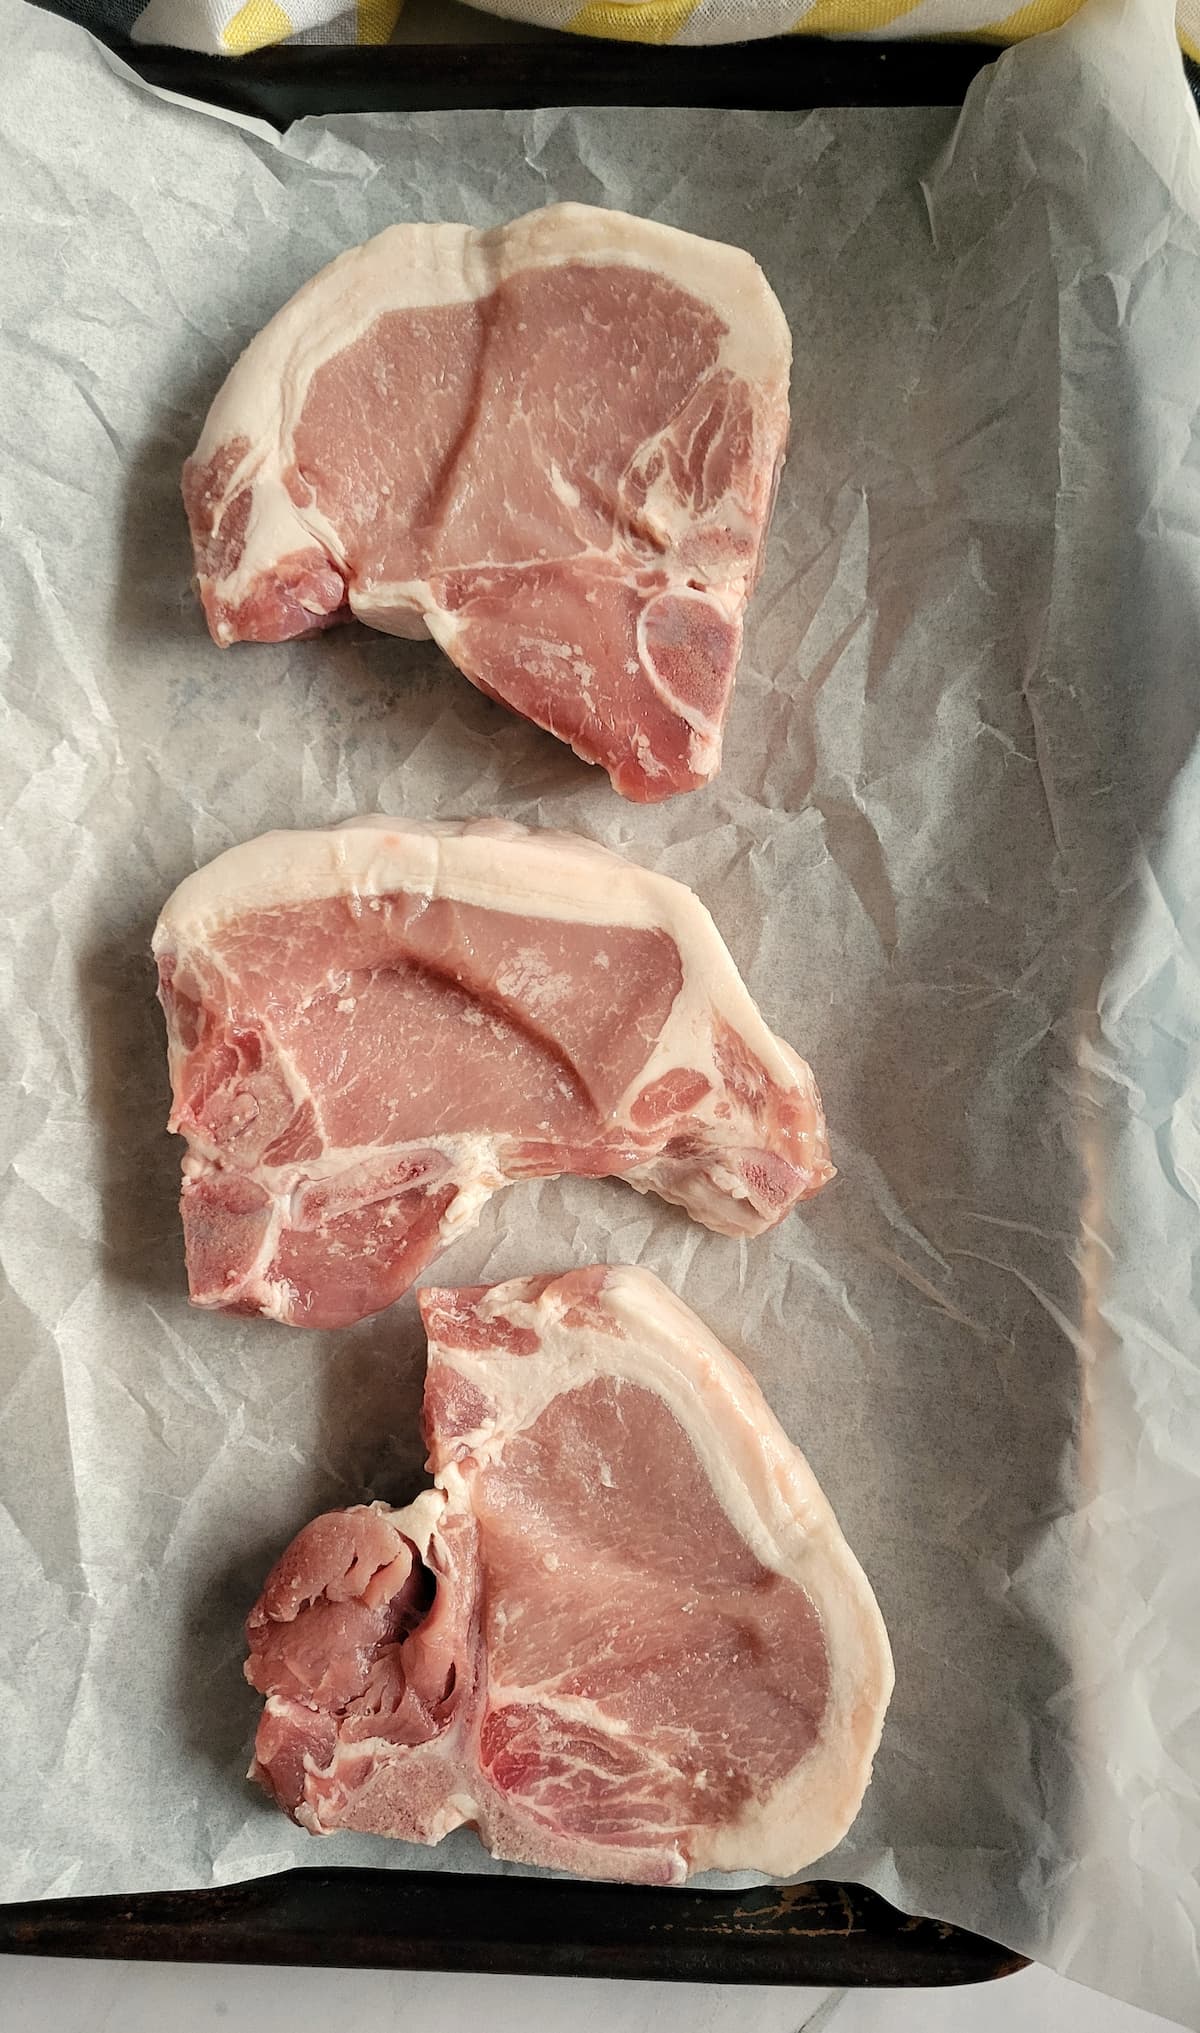 3 raw pork chops on a parchment lined baking sheet